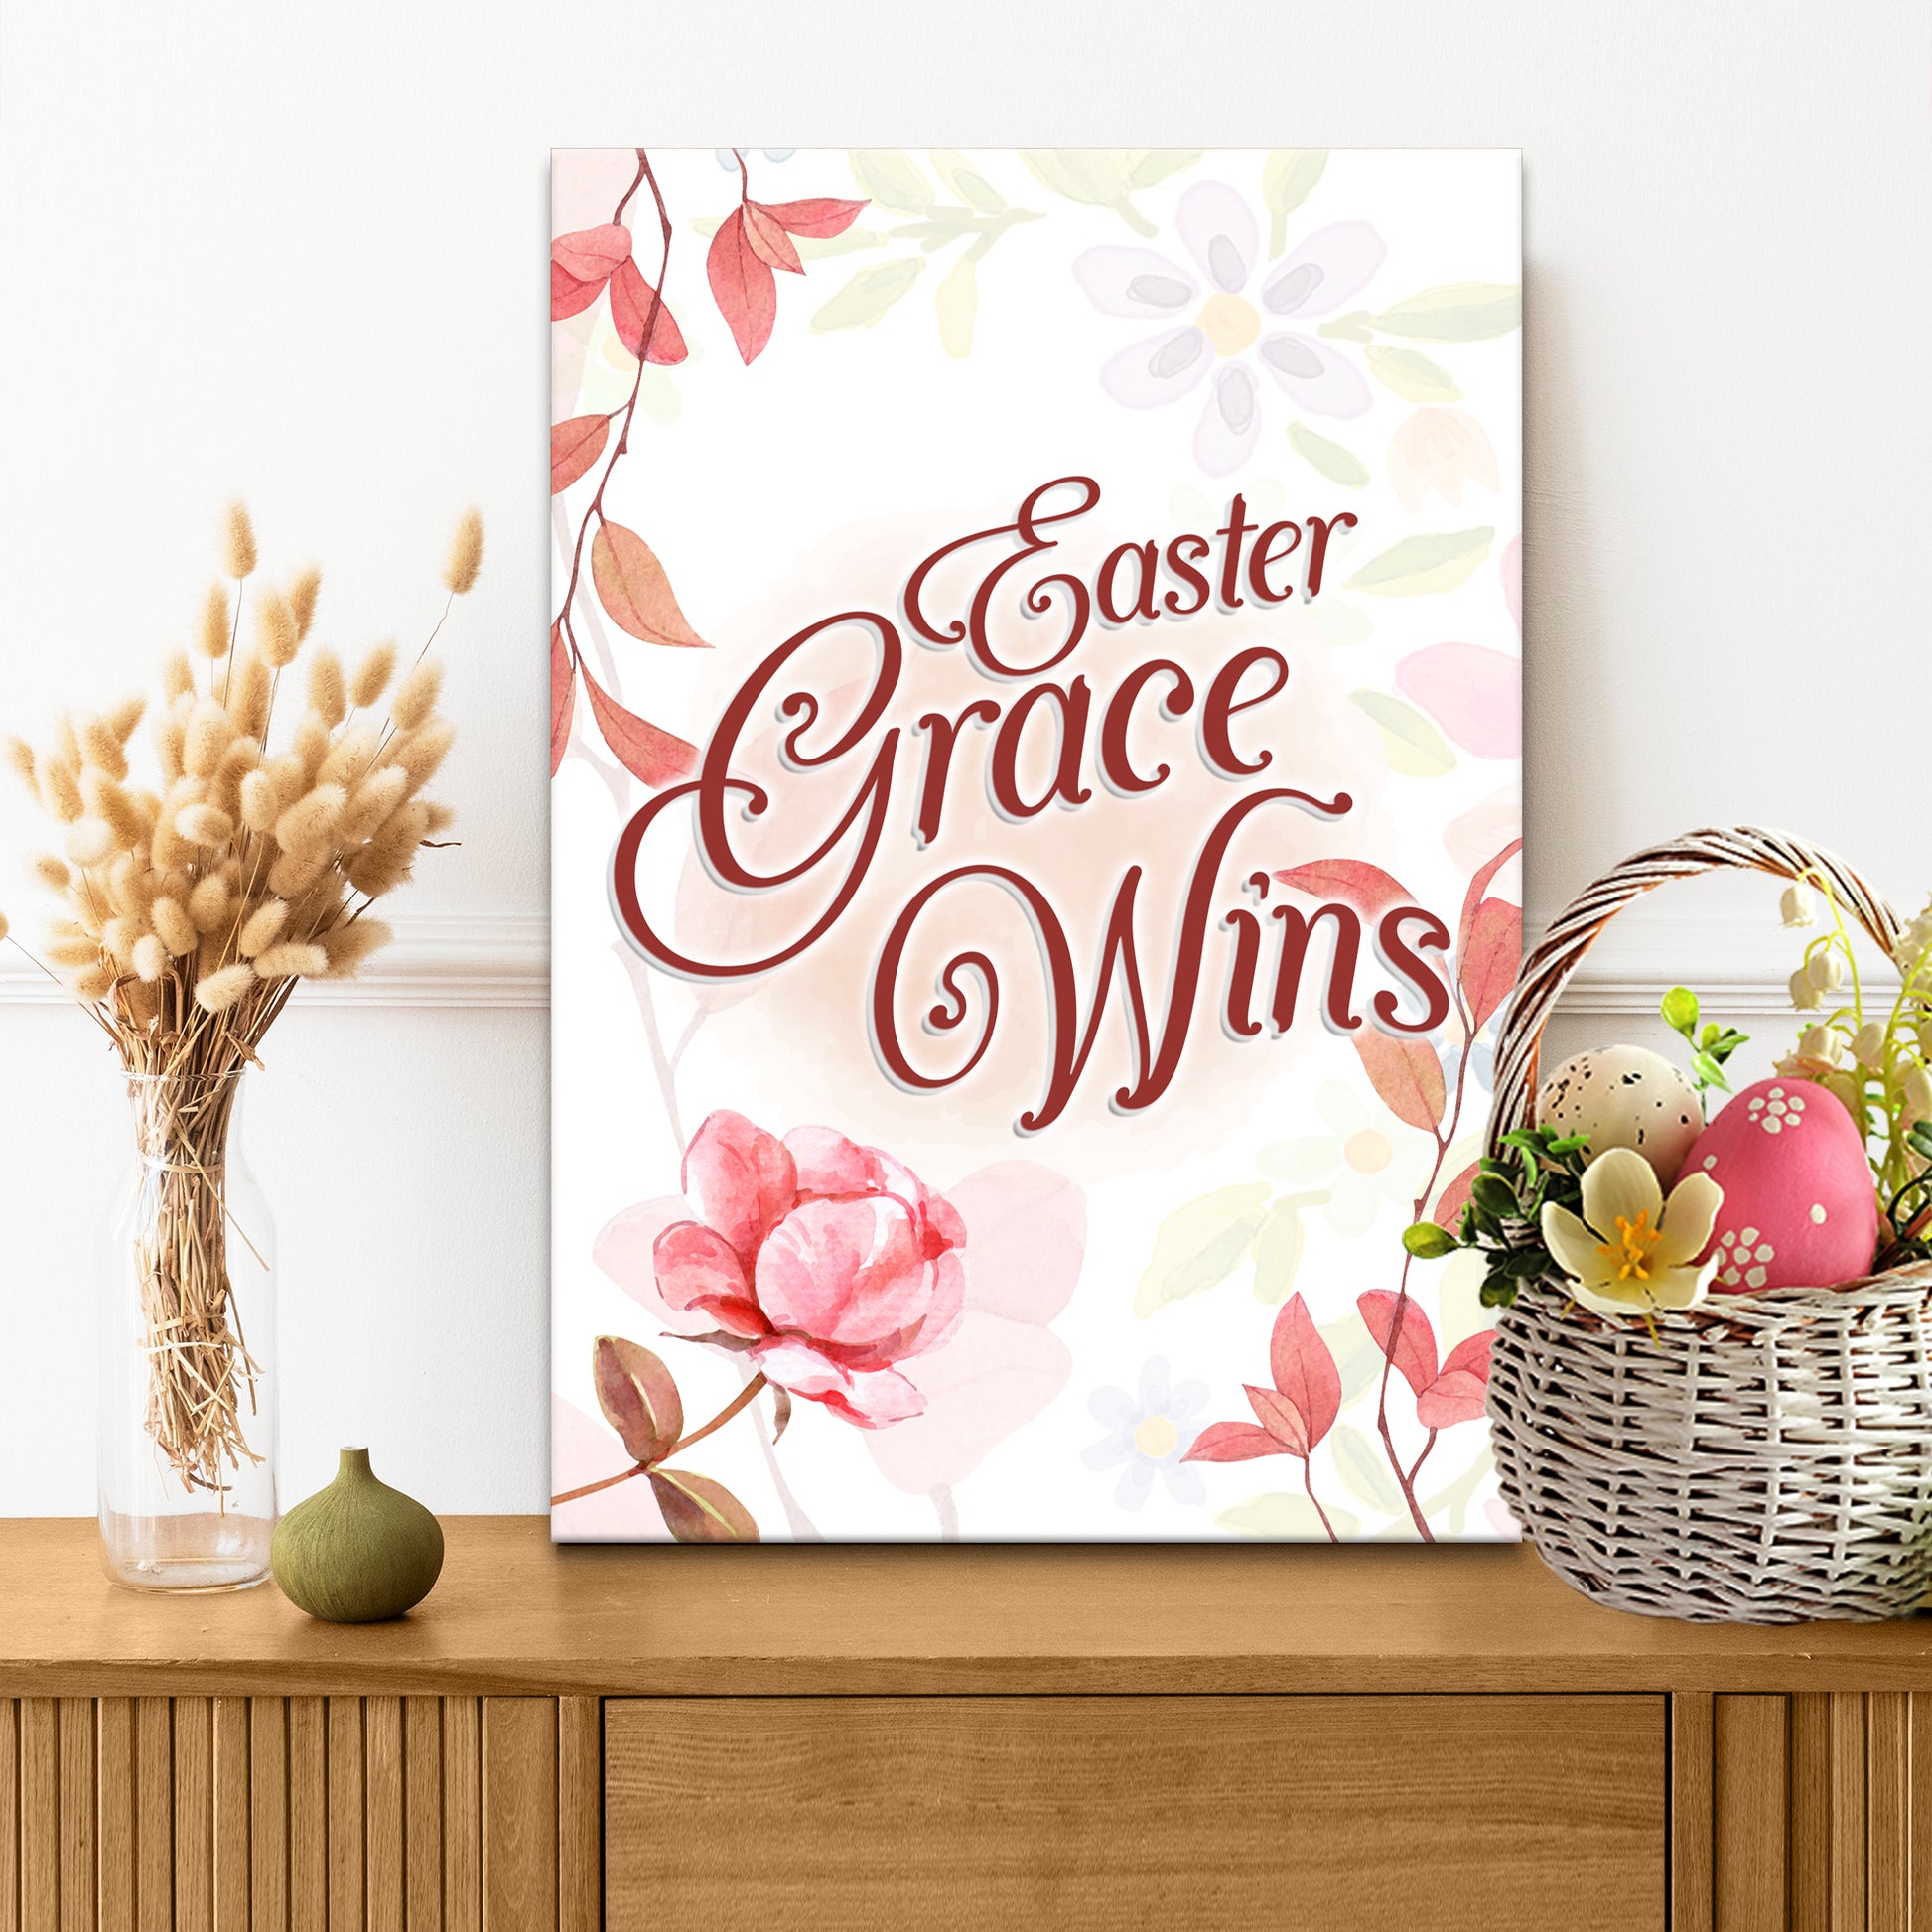 Easter Grace Wins Sign - Image by Tailored Canvases